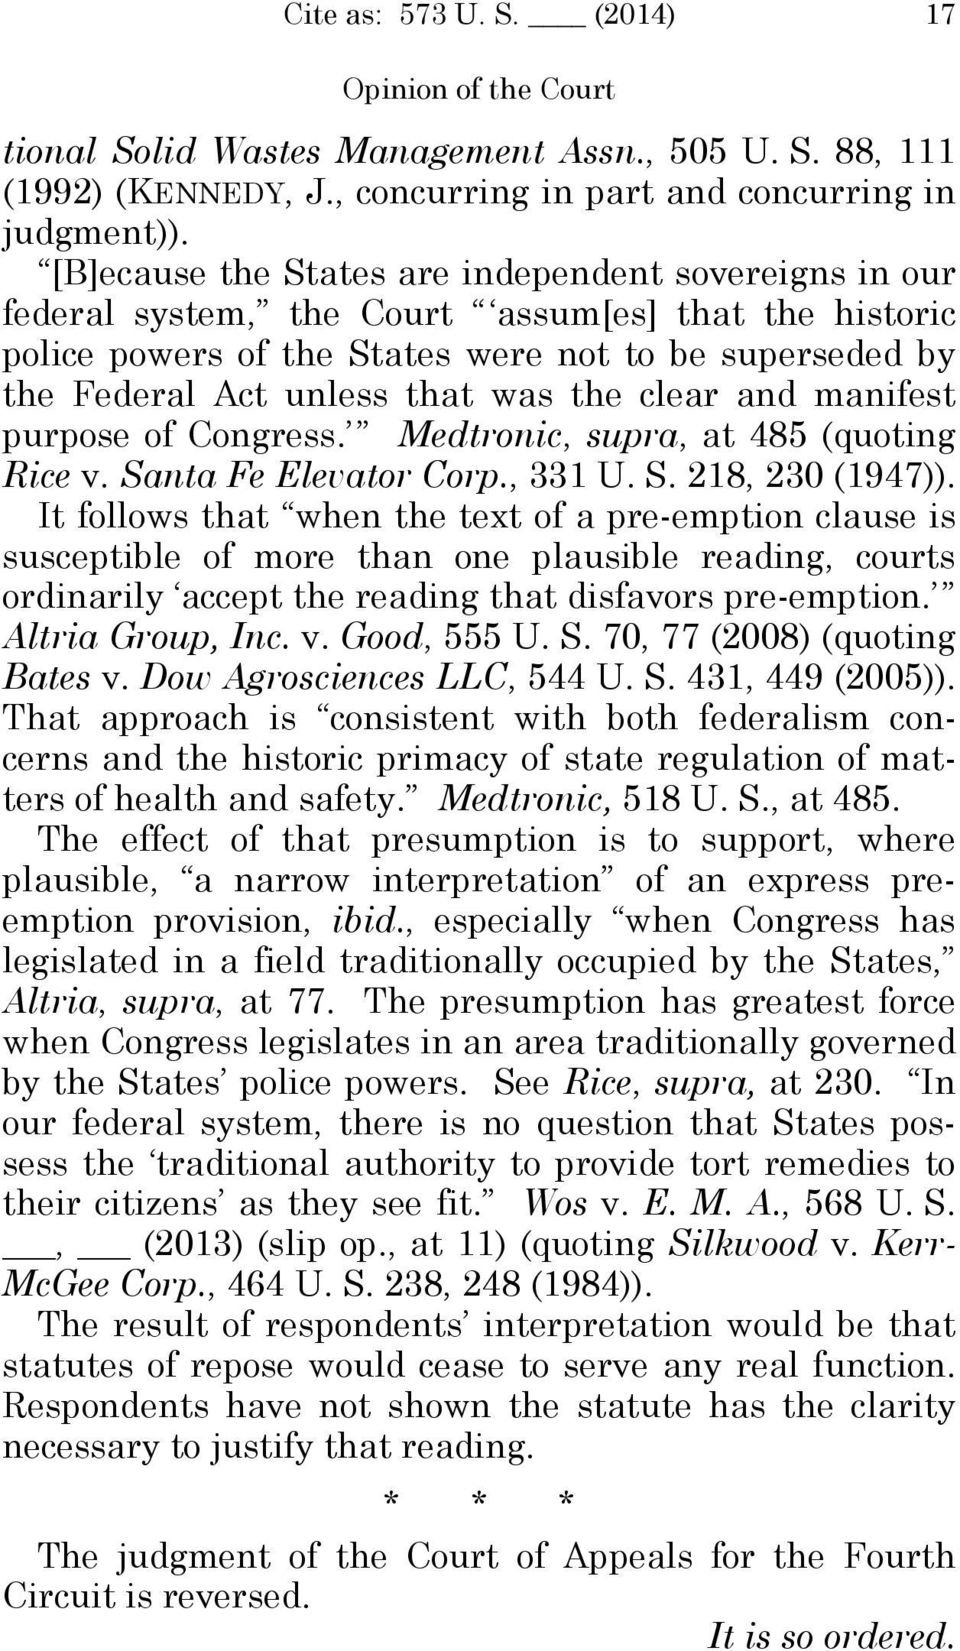 the clear and manifest purpose of Congress. Medtronic, supra, at 485 (quoting Rice v. Santa Fe Elevator Corp., 331 U. S. 218, 230 (1947)).